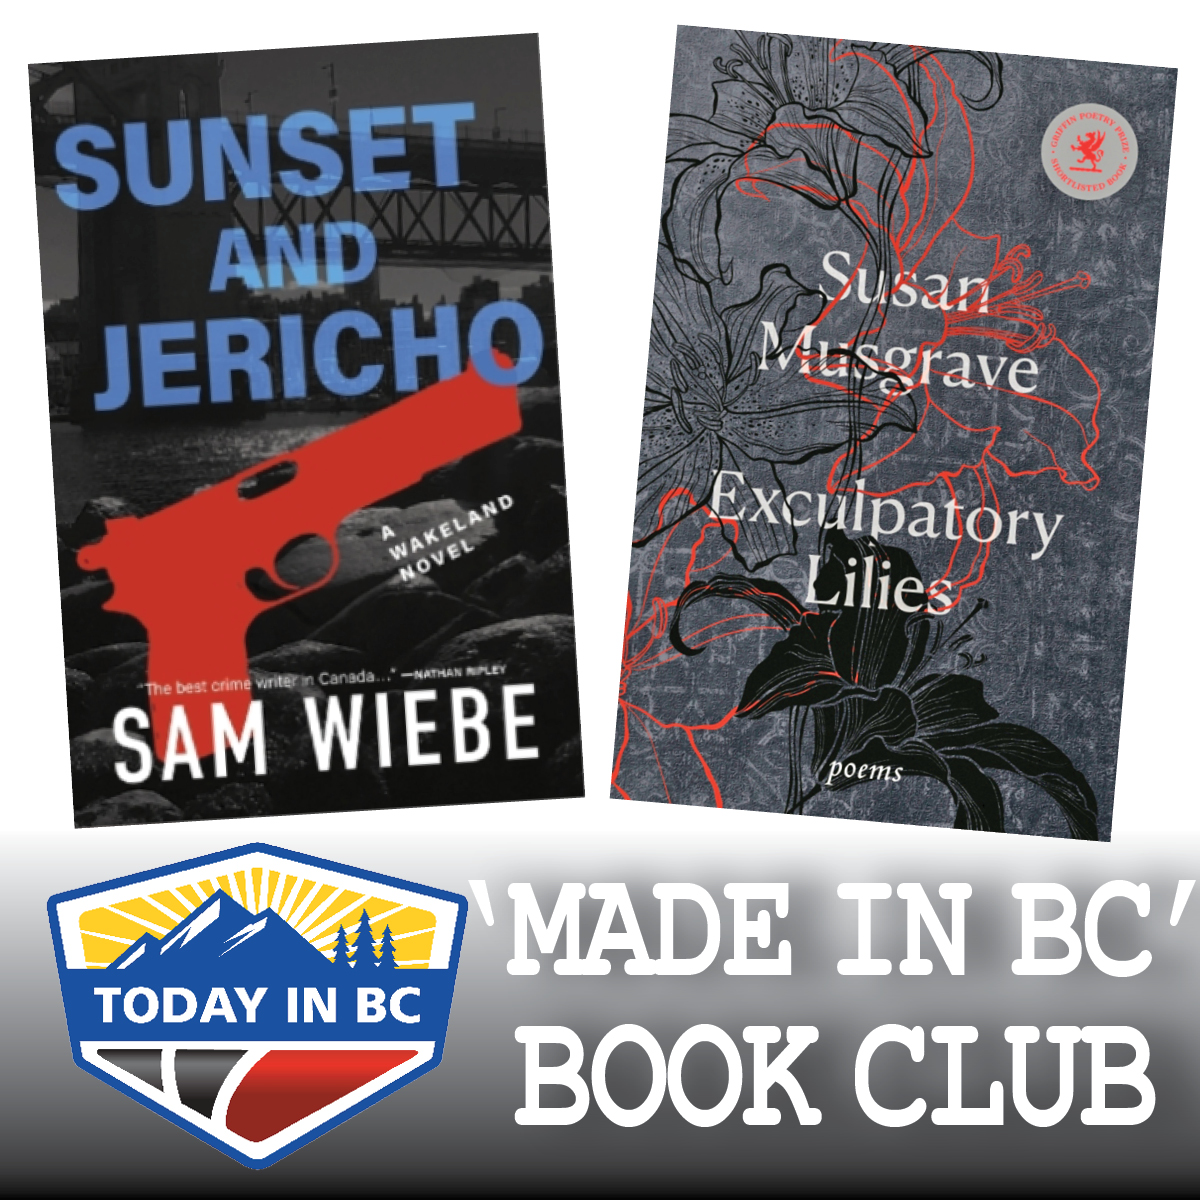 Award winning authors Susan Musgrave and Sam Wiebe talk about their latest books